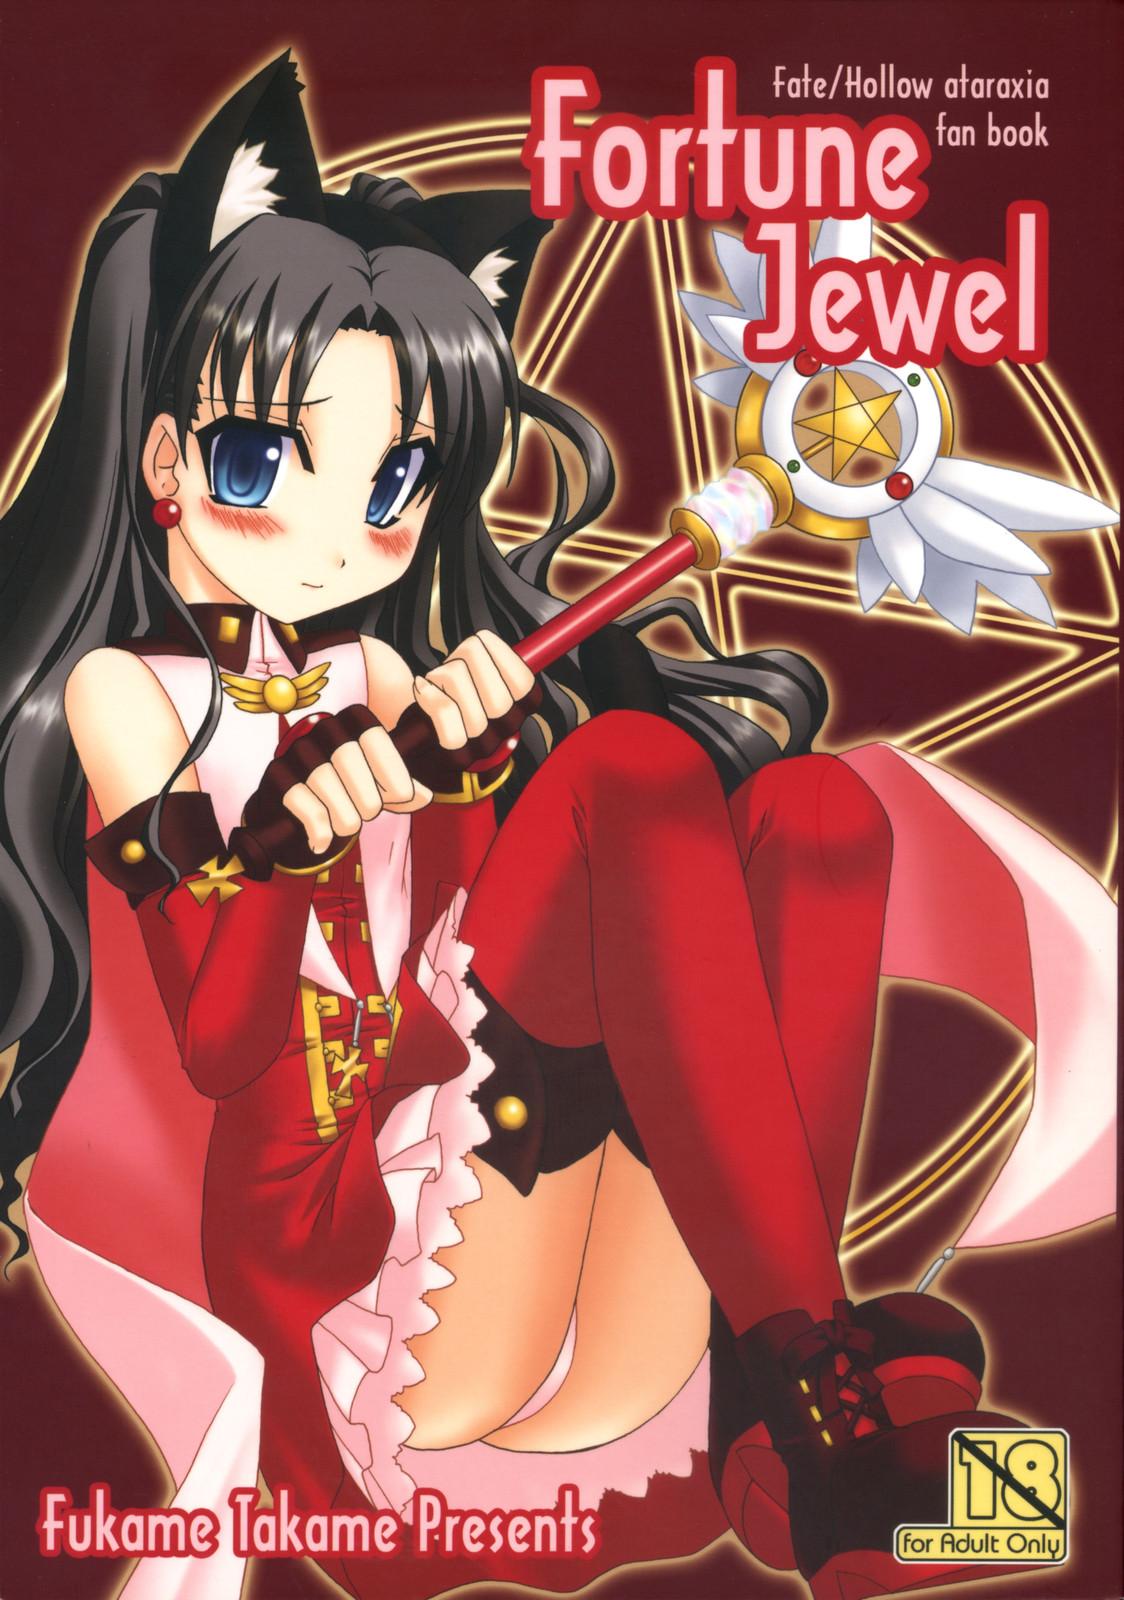 Cbt Fortune Jewel - Fate stay night Fate hollow ataraxia Blackcock - Picture 1